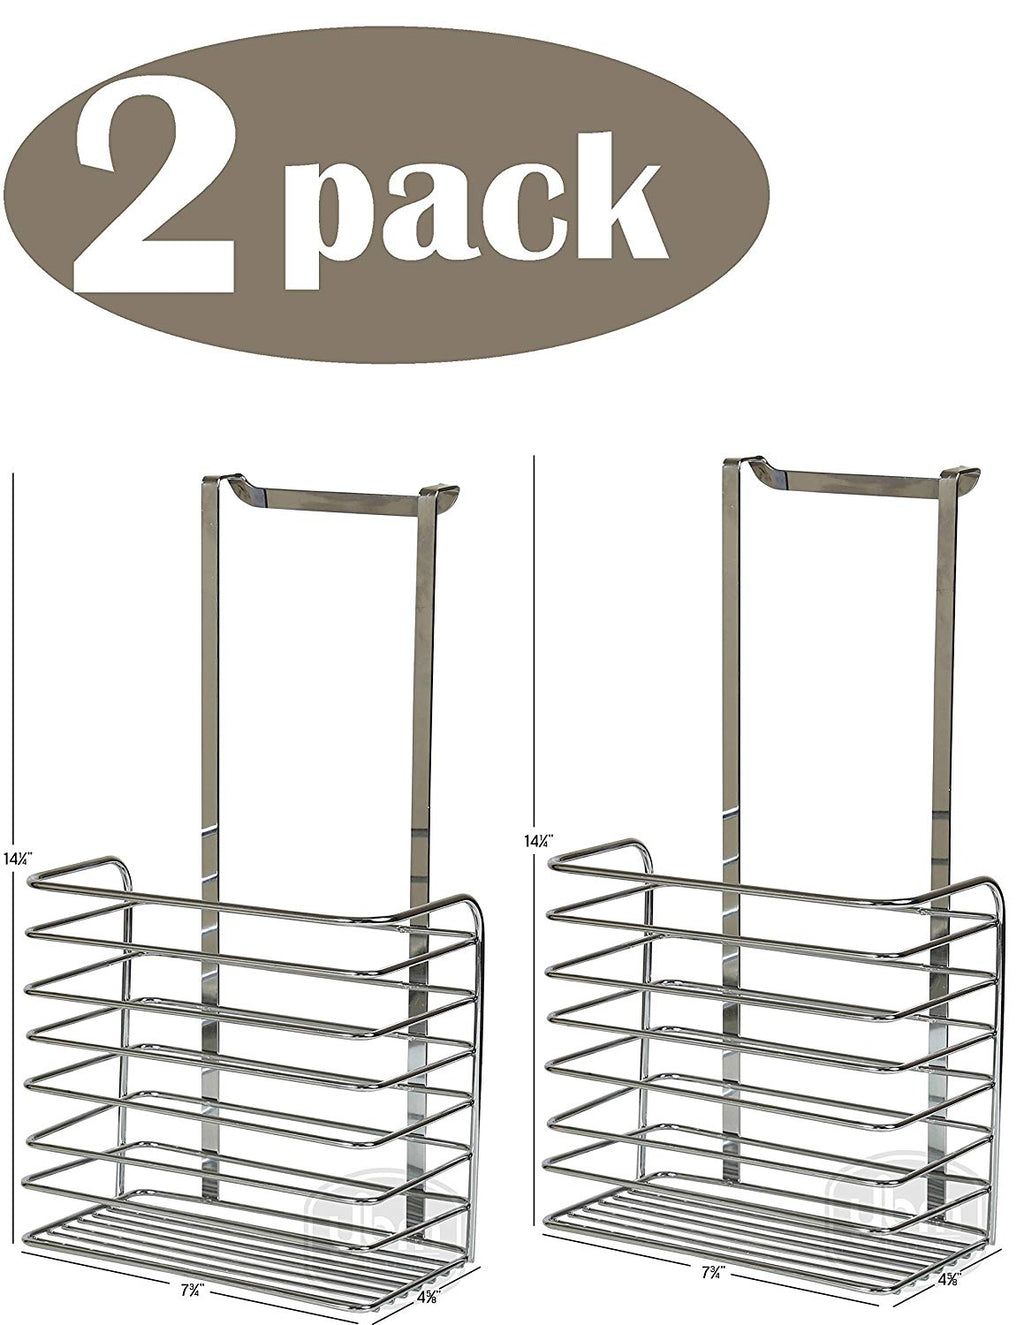 YBM HOME Ybmhome Over The Door Storage Basket Kitchen Cabinet Bathroom Shower Organization Aluminum Foil, Sandwich Bags, Cleaning Supplies Chrome 2217-2 (2)